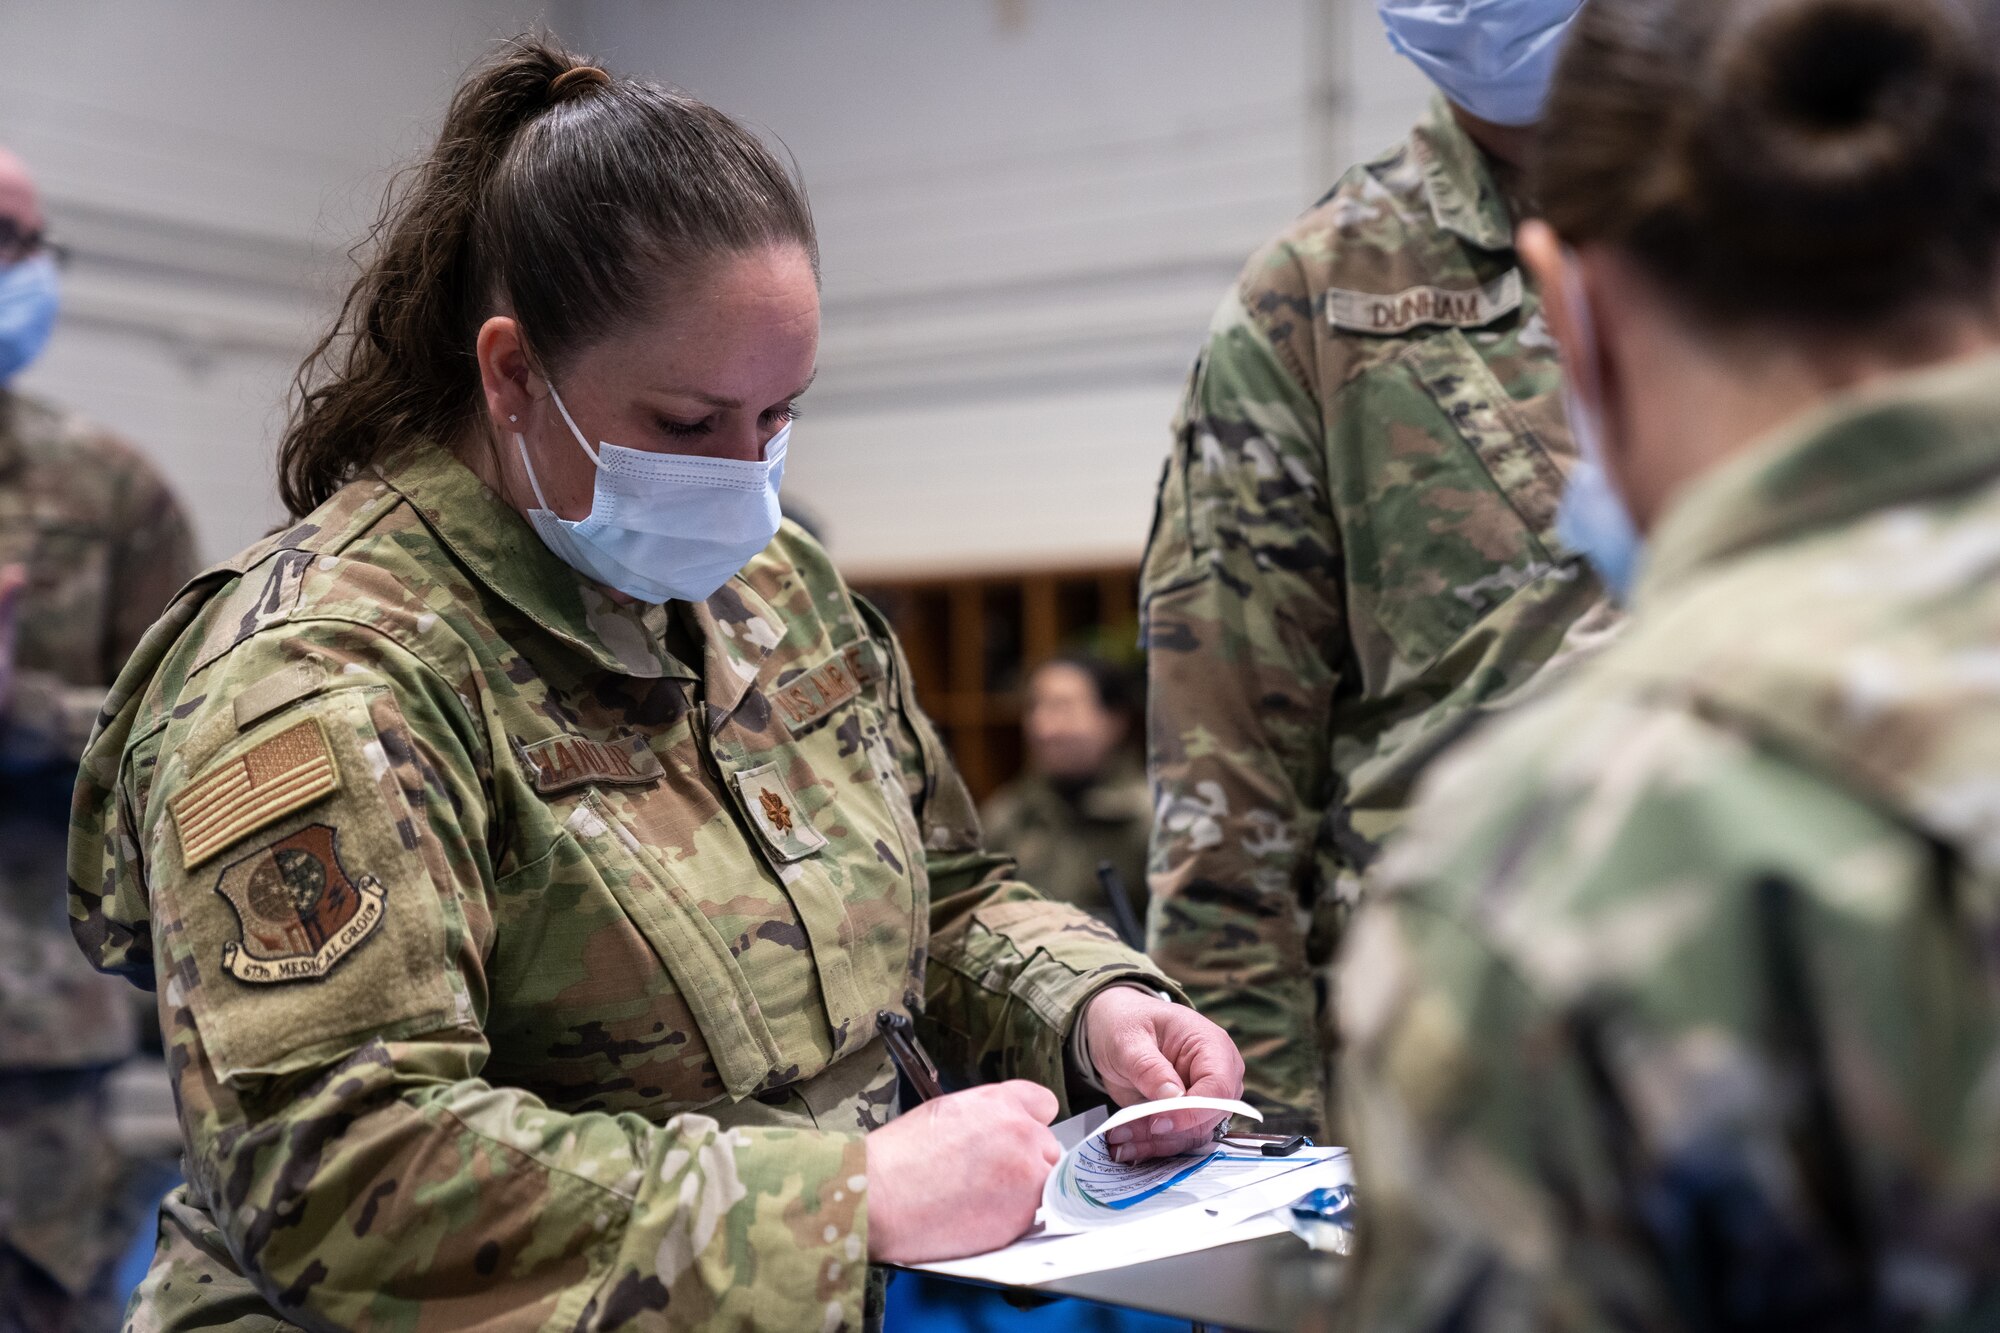 U.S. Air Force Maj. Christen Chandler writes down notes on a paper in front of an Airman